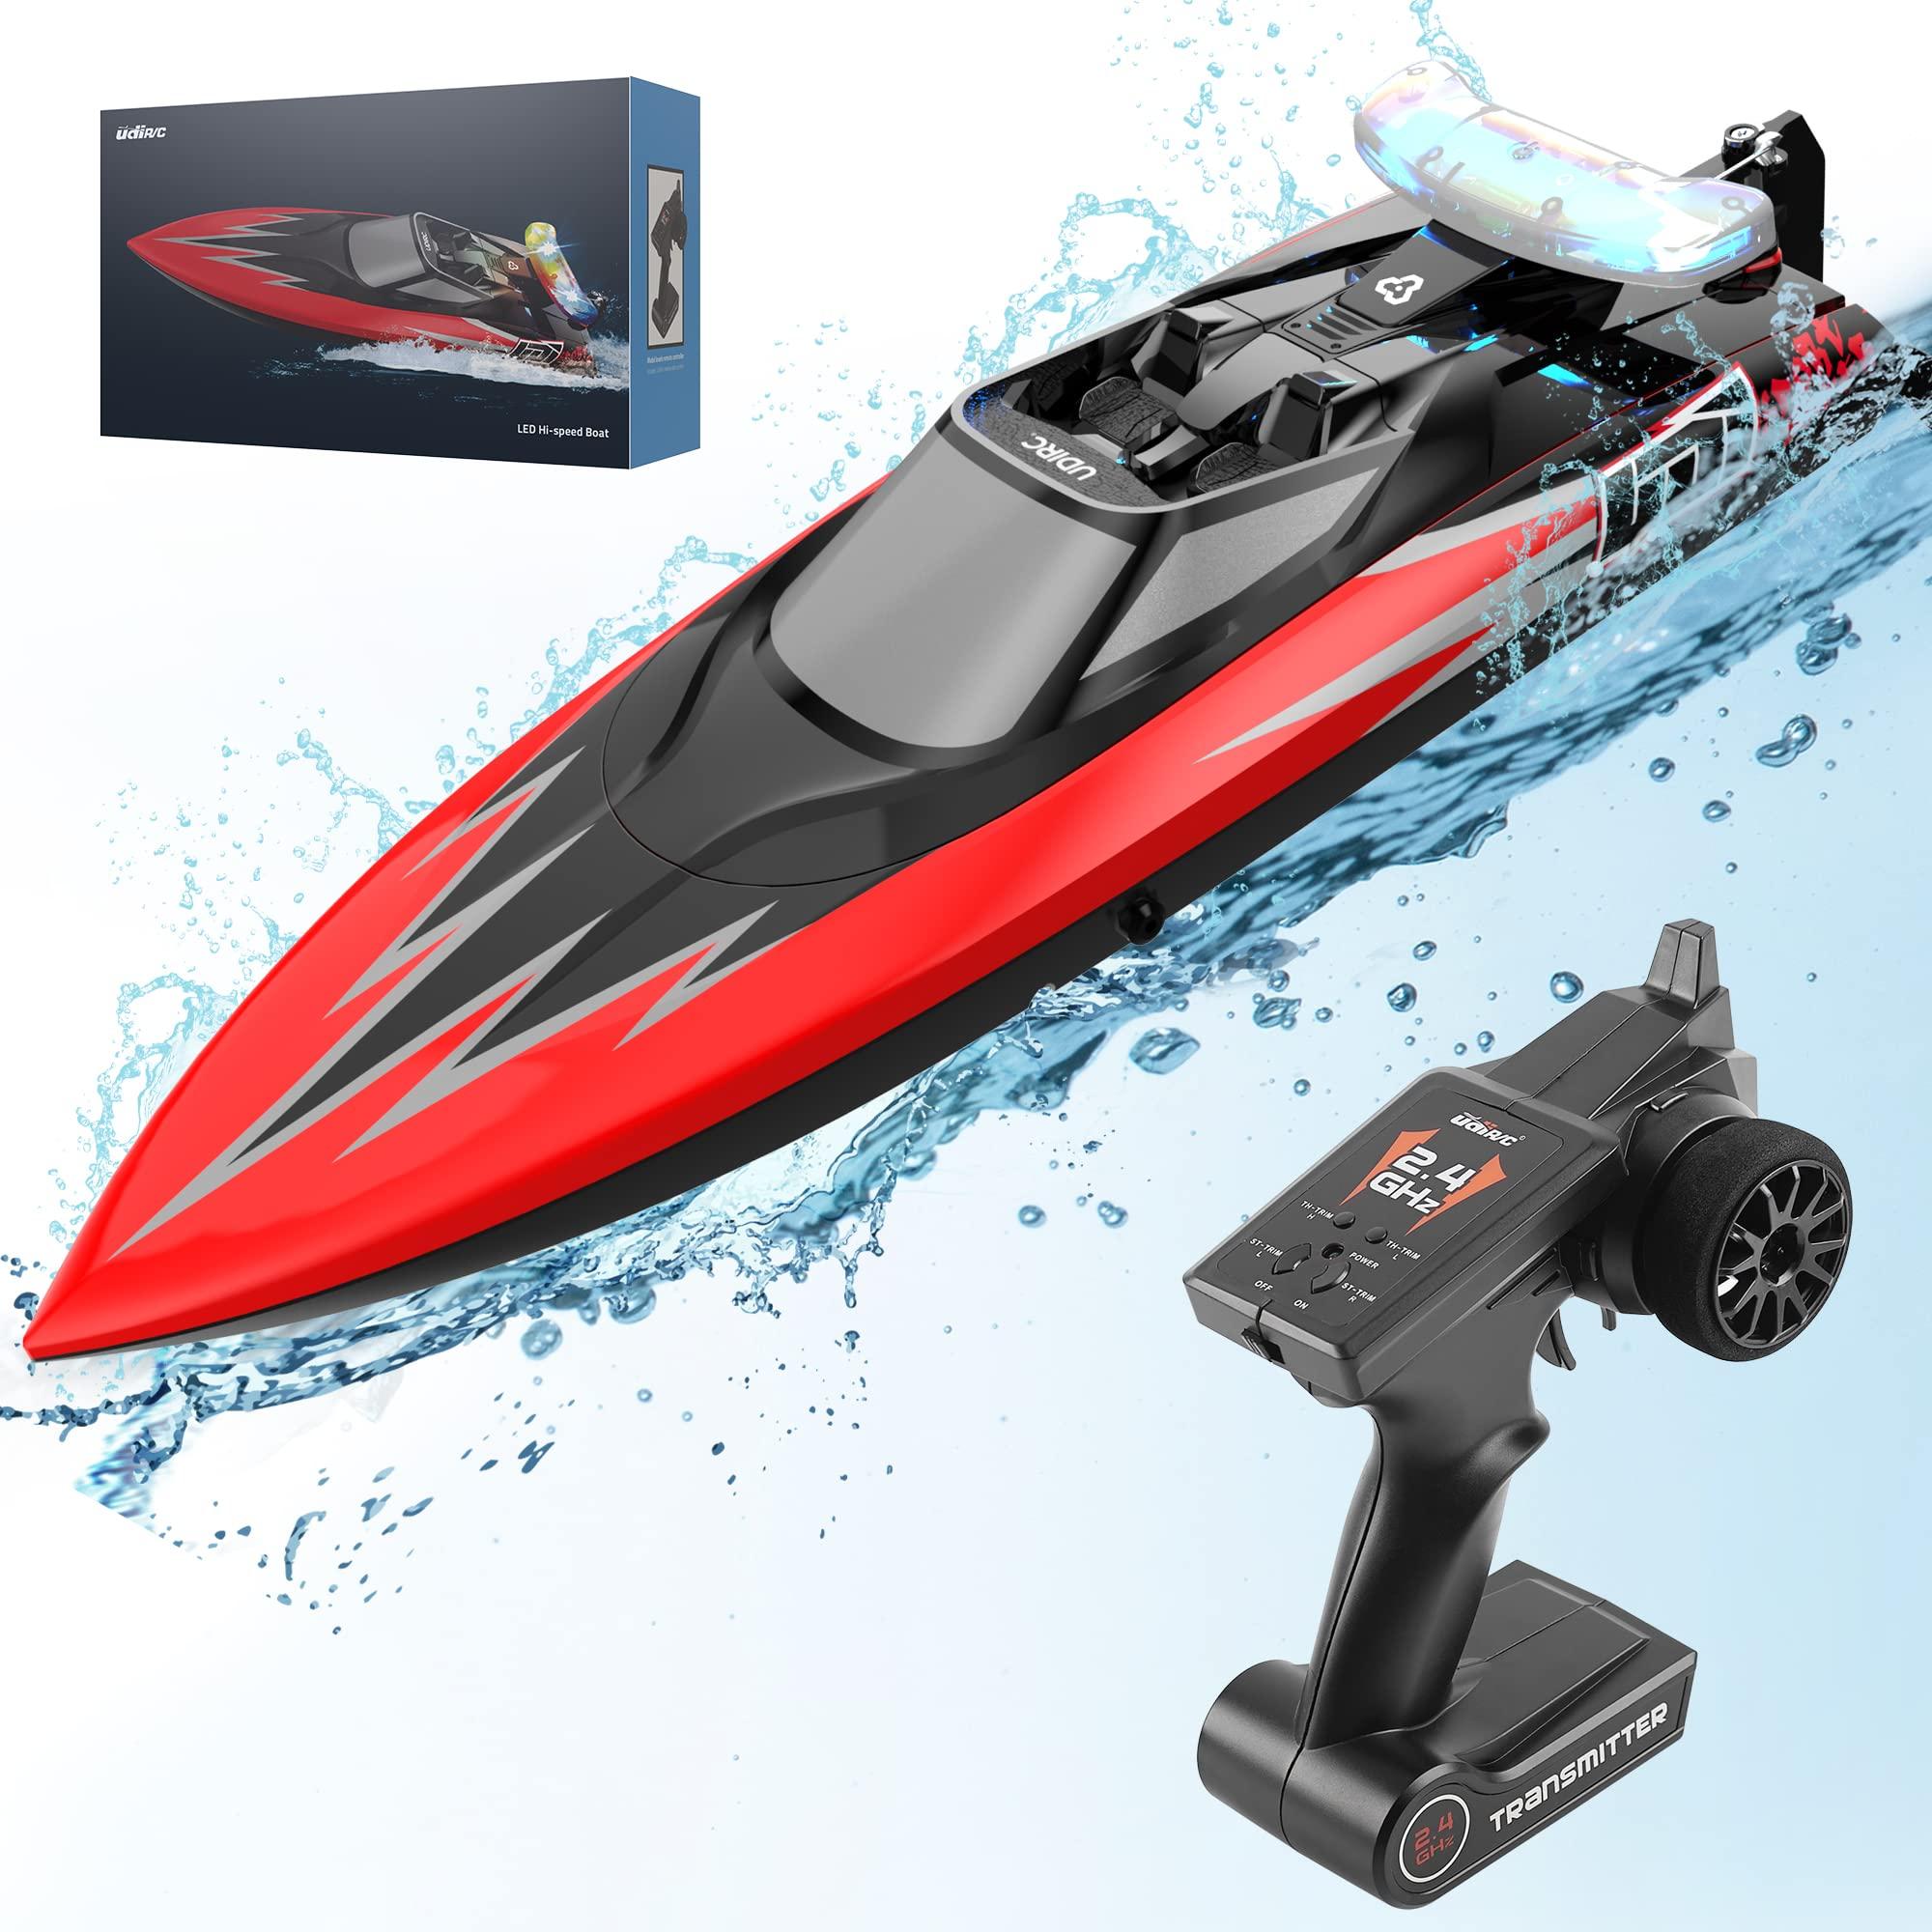 Fastest Rc Boat 2020: Key Considerations for Choosing the Fastest RC Boat in 2020